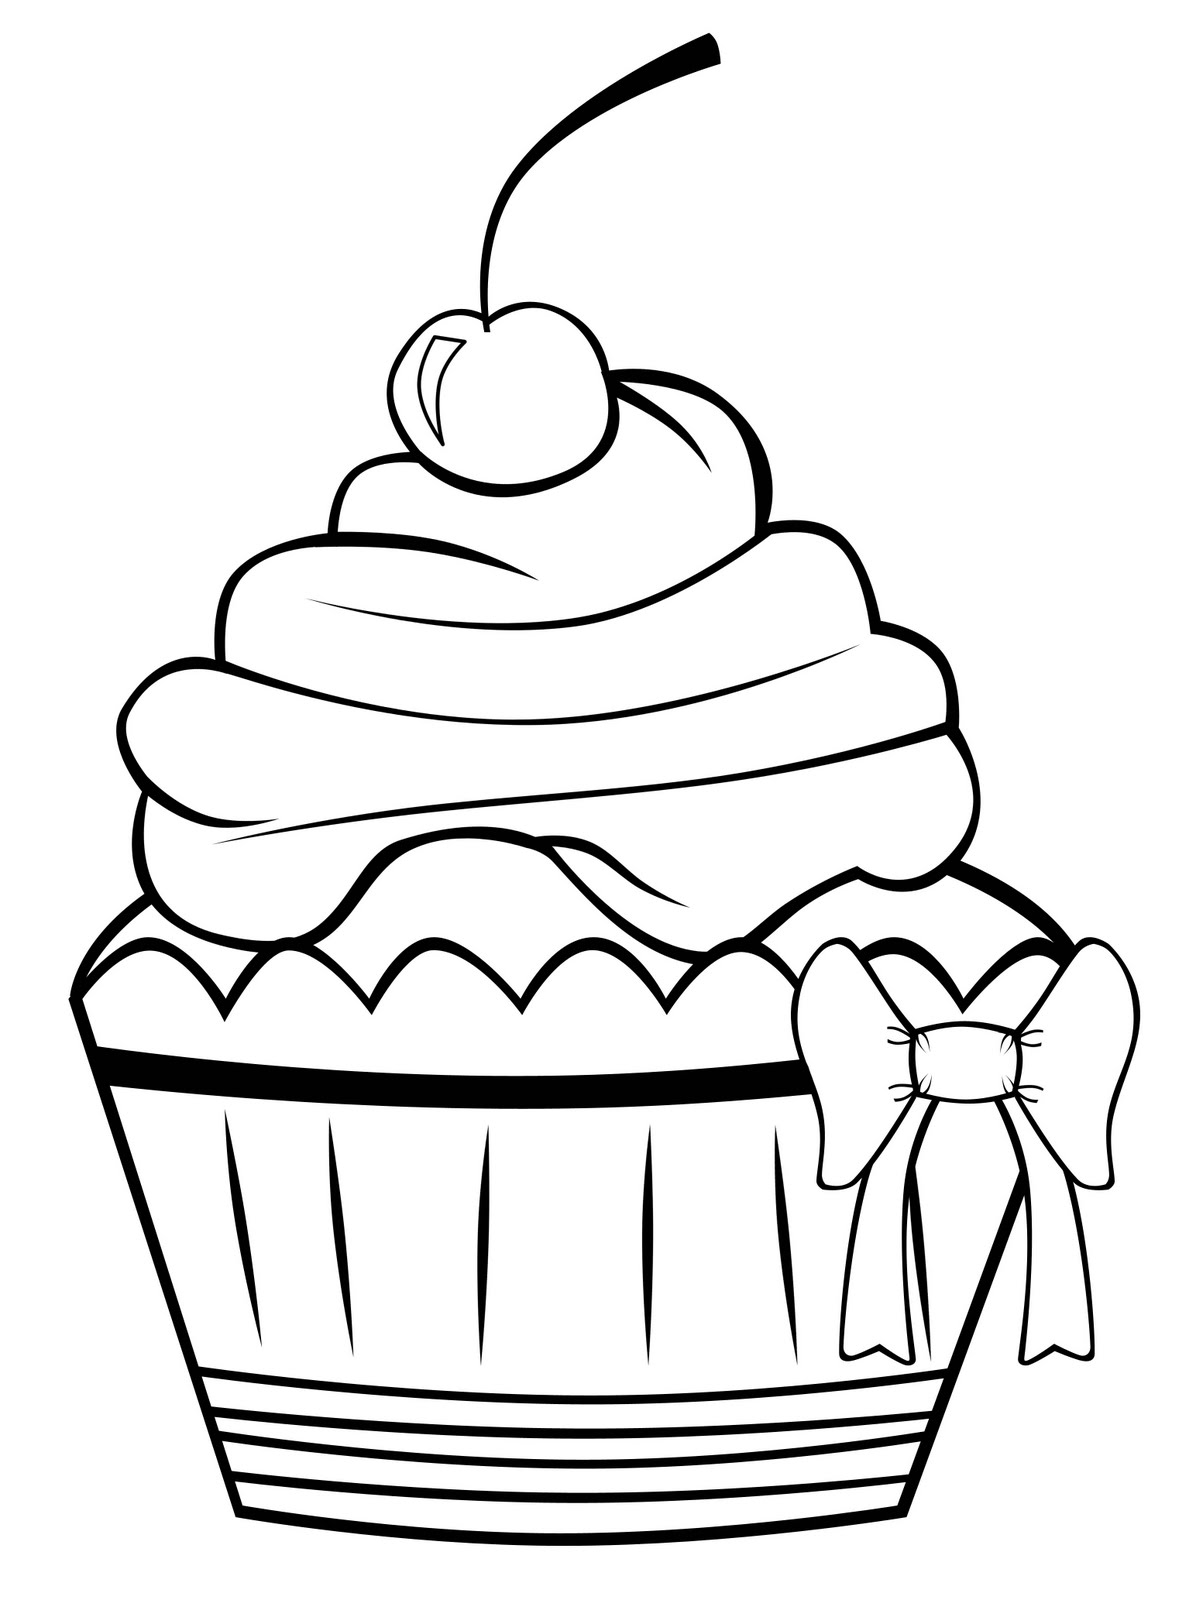 Cupcakes To Color In Printable - Free printable Coloring pages for kids